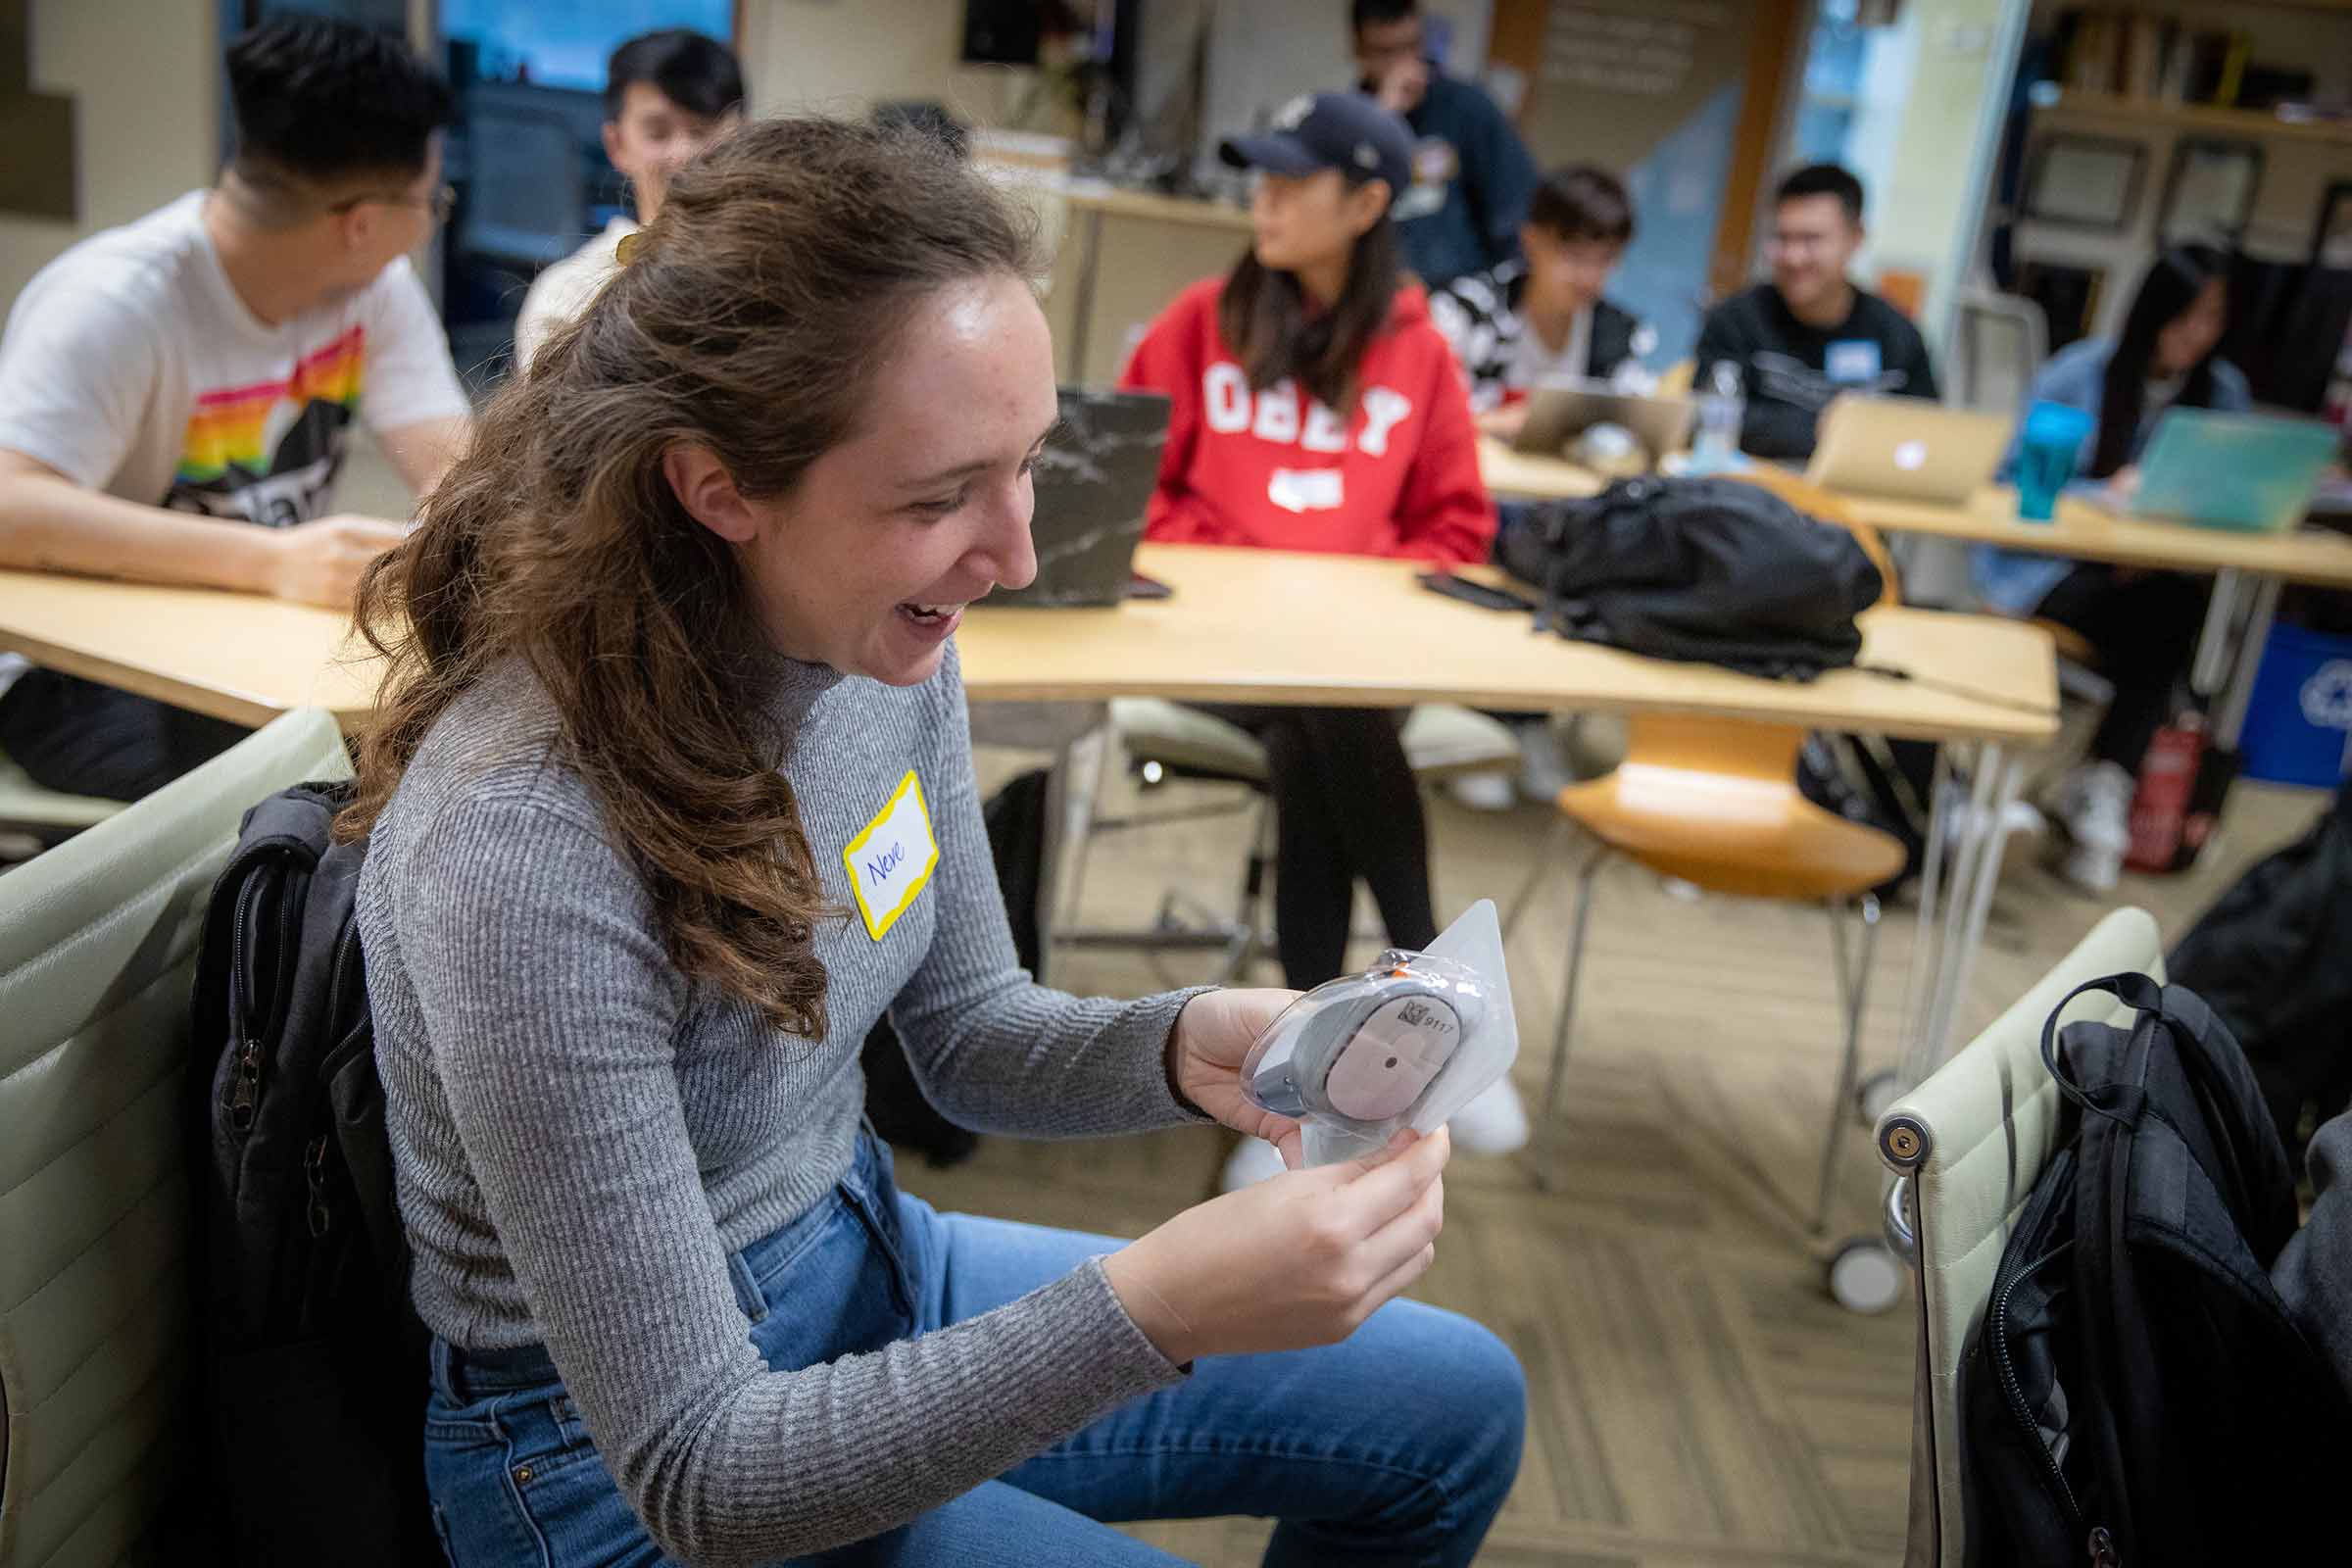 Cognitive Science major Neve Foresti working on an app’s user experience for the Diabetes Design Initiative at the Design Lab. (Photo courtesy of UC San Diego)